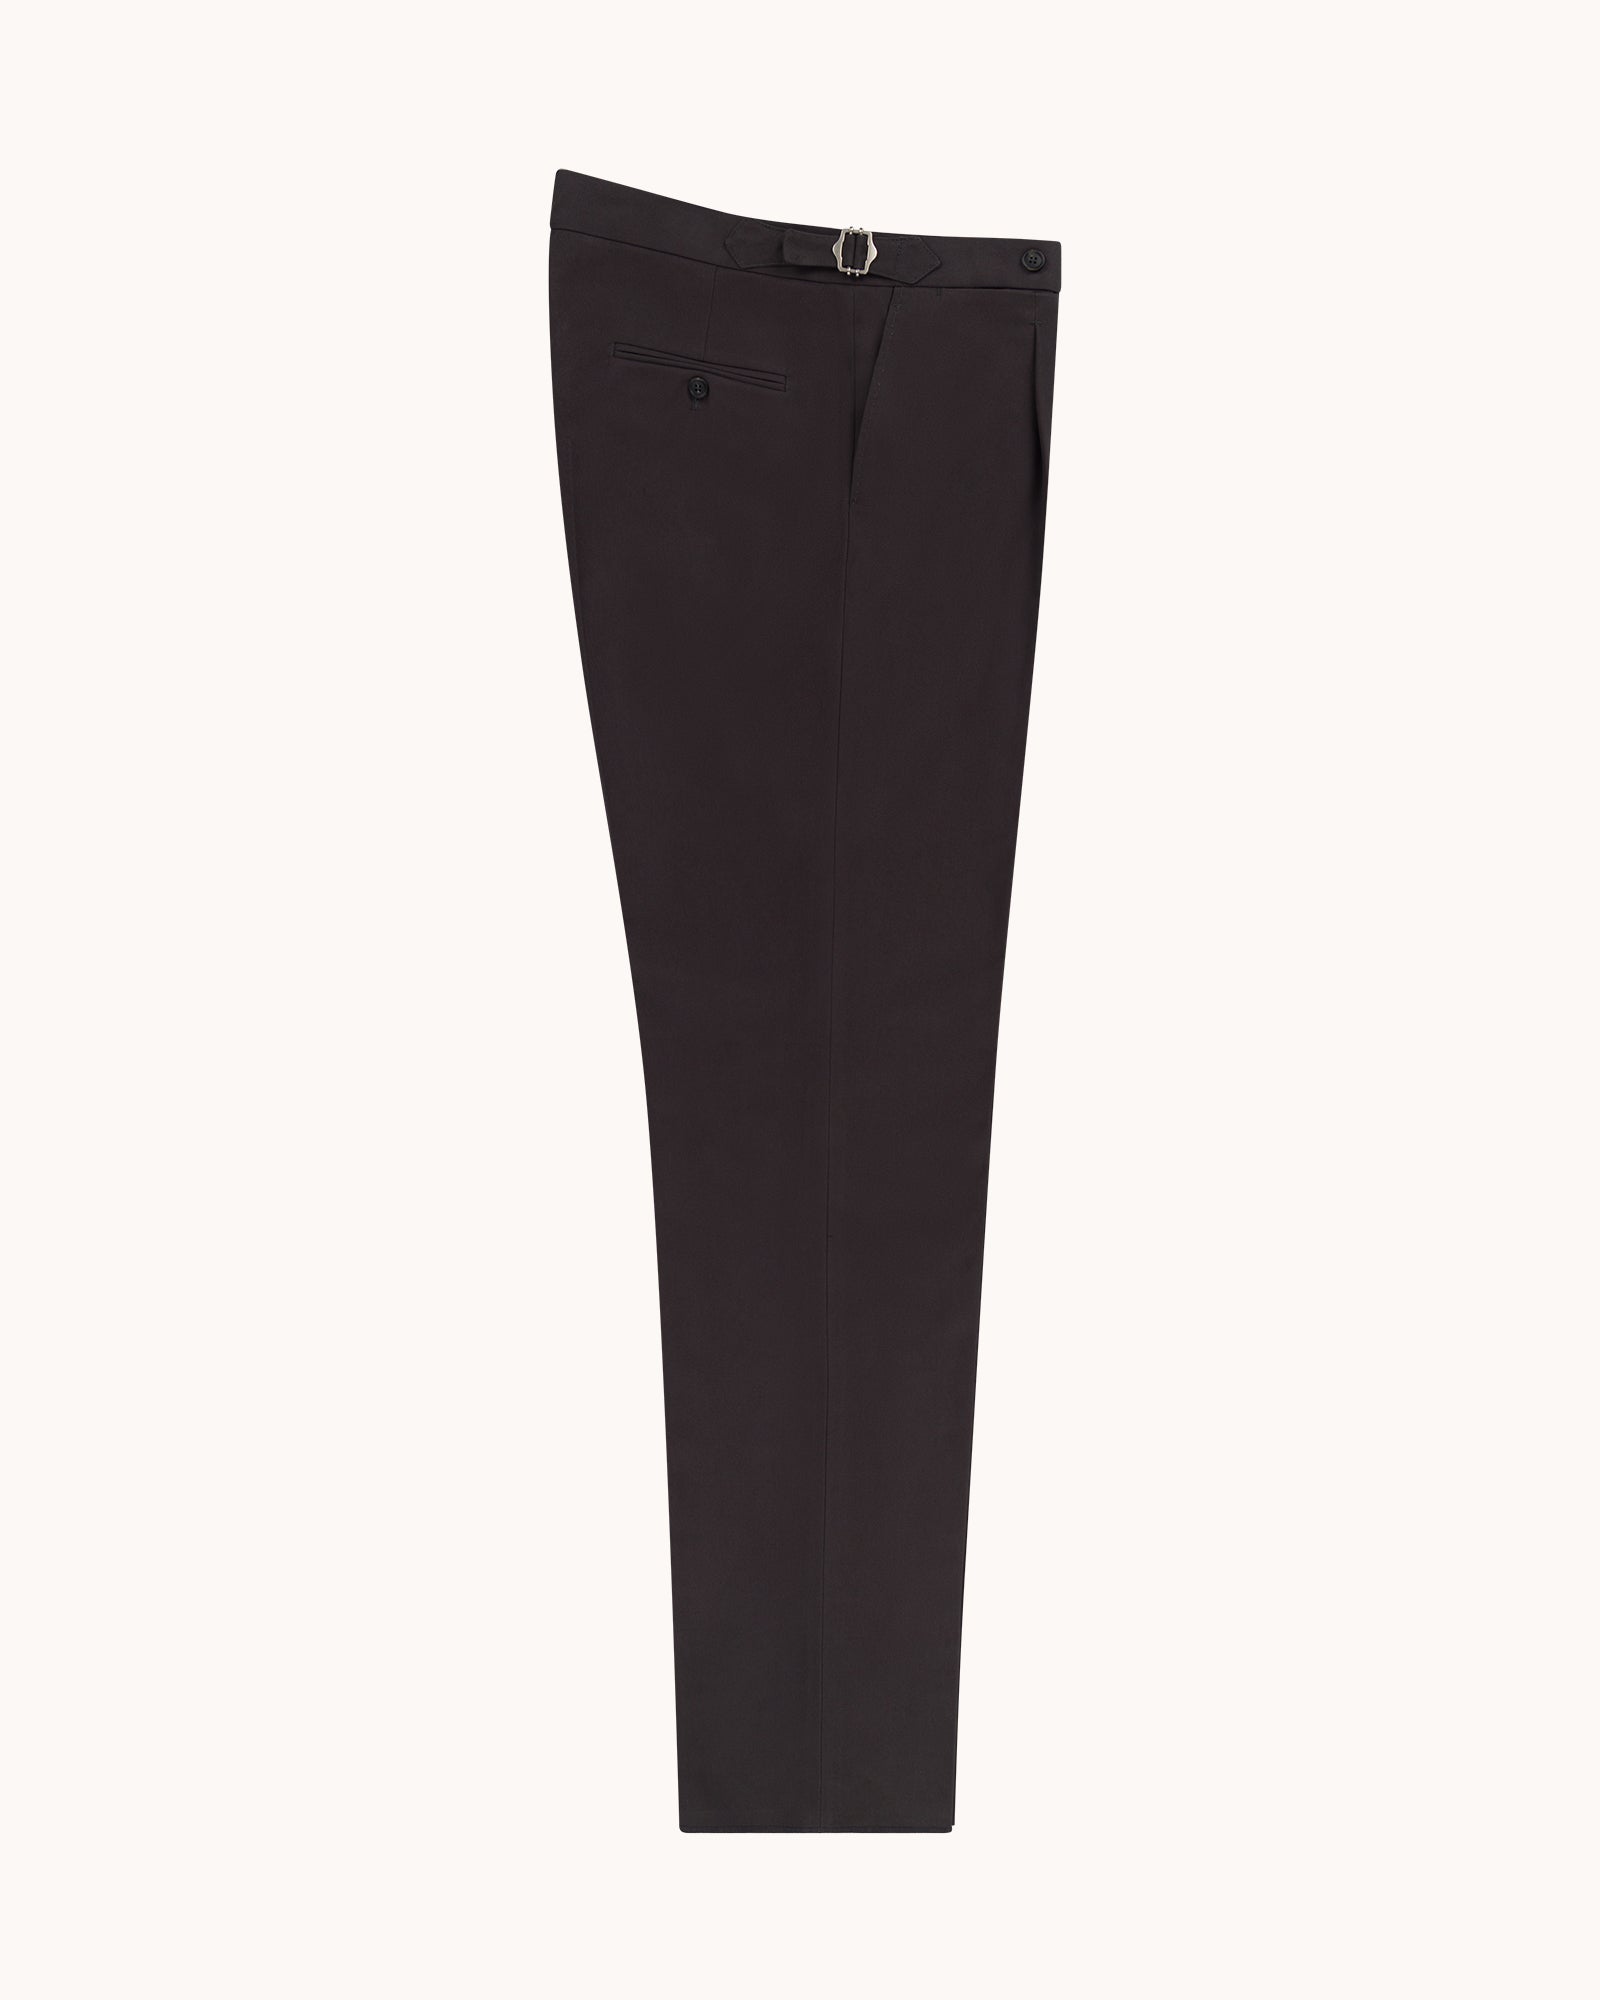 Single Pleat Trouser - Anthracite Brushed Cotton